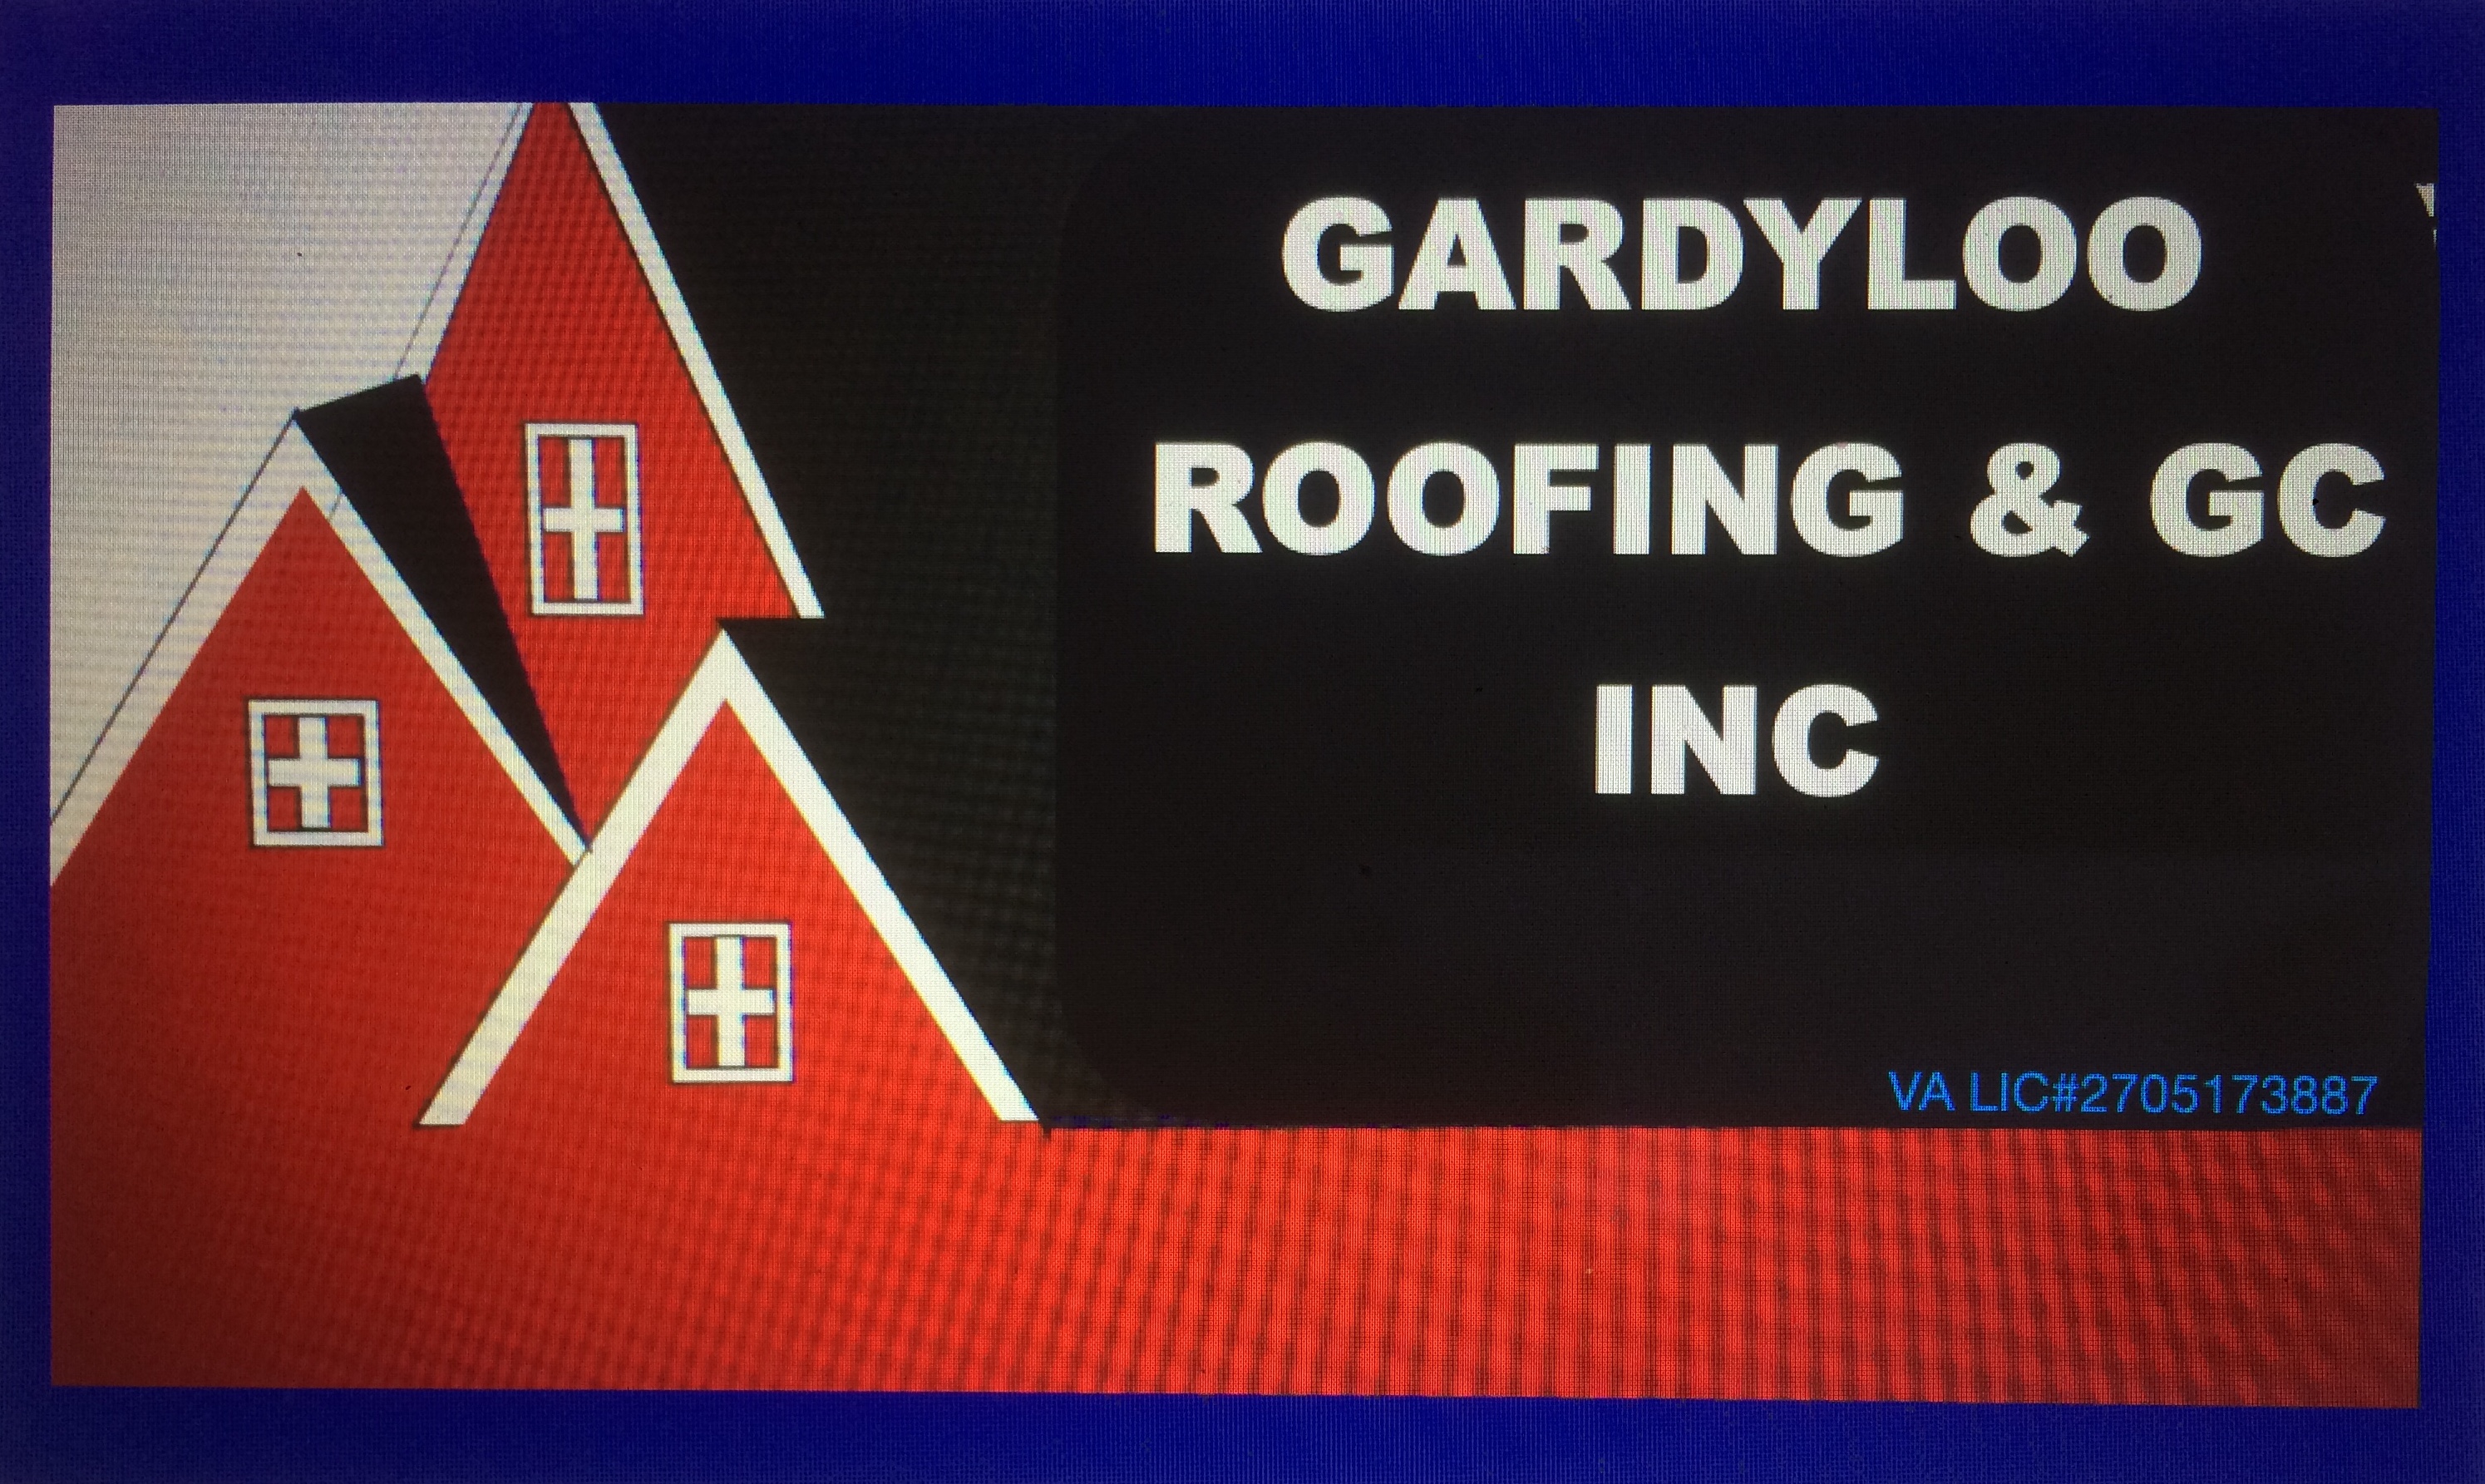 Gardyloo Roofing & Gc Inc. Advises Against DIY Roofing Services 